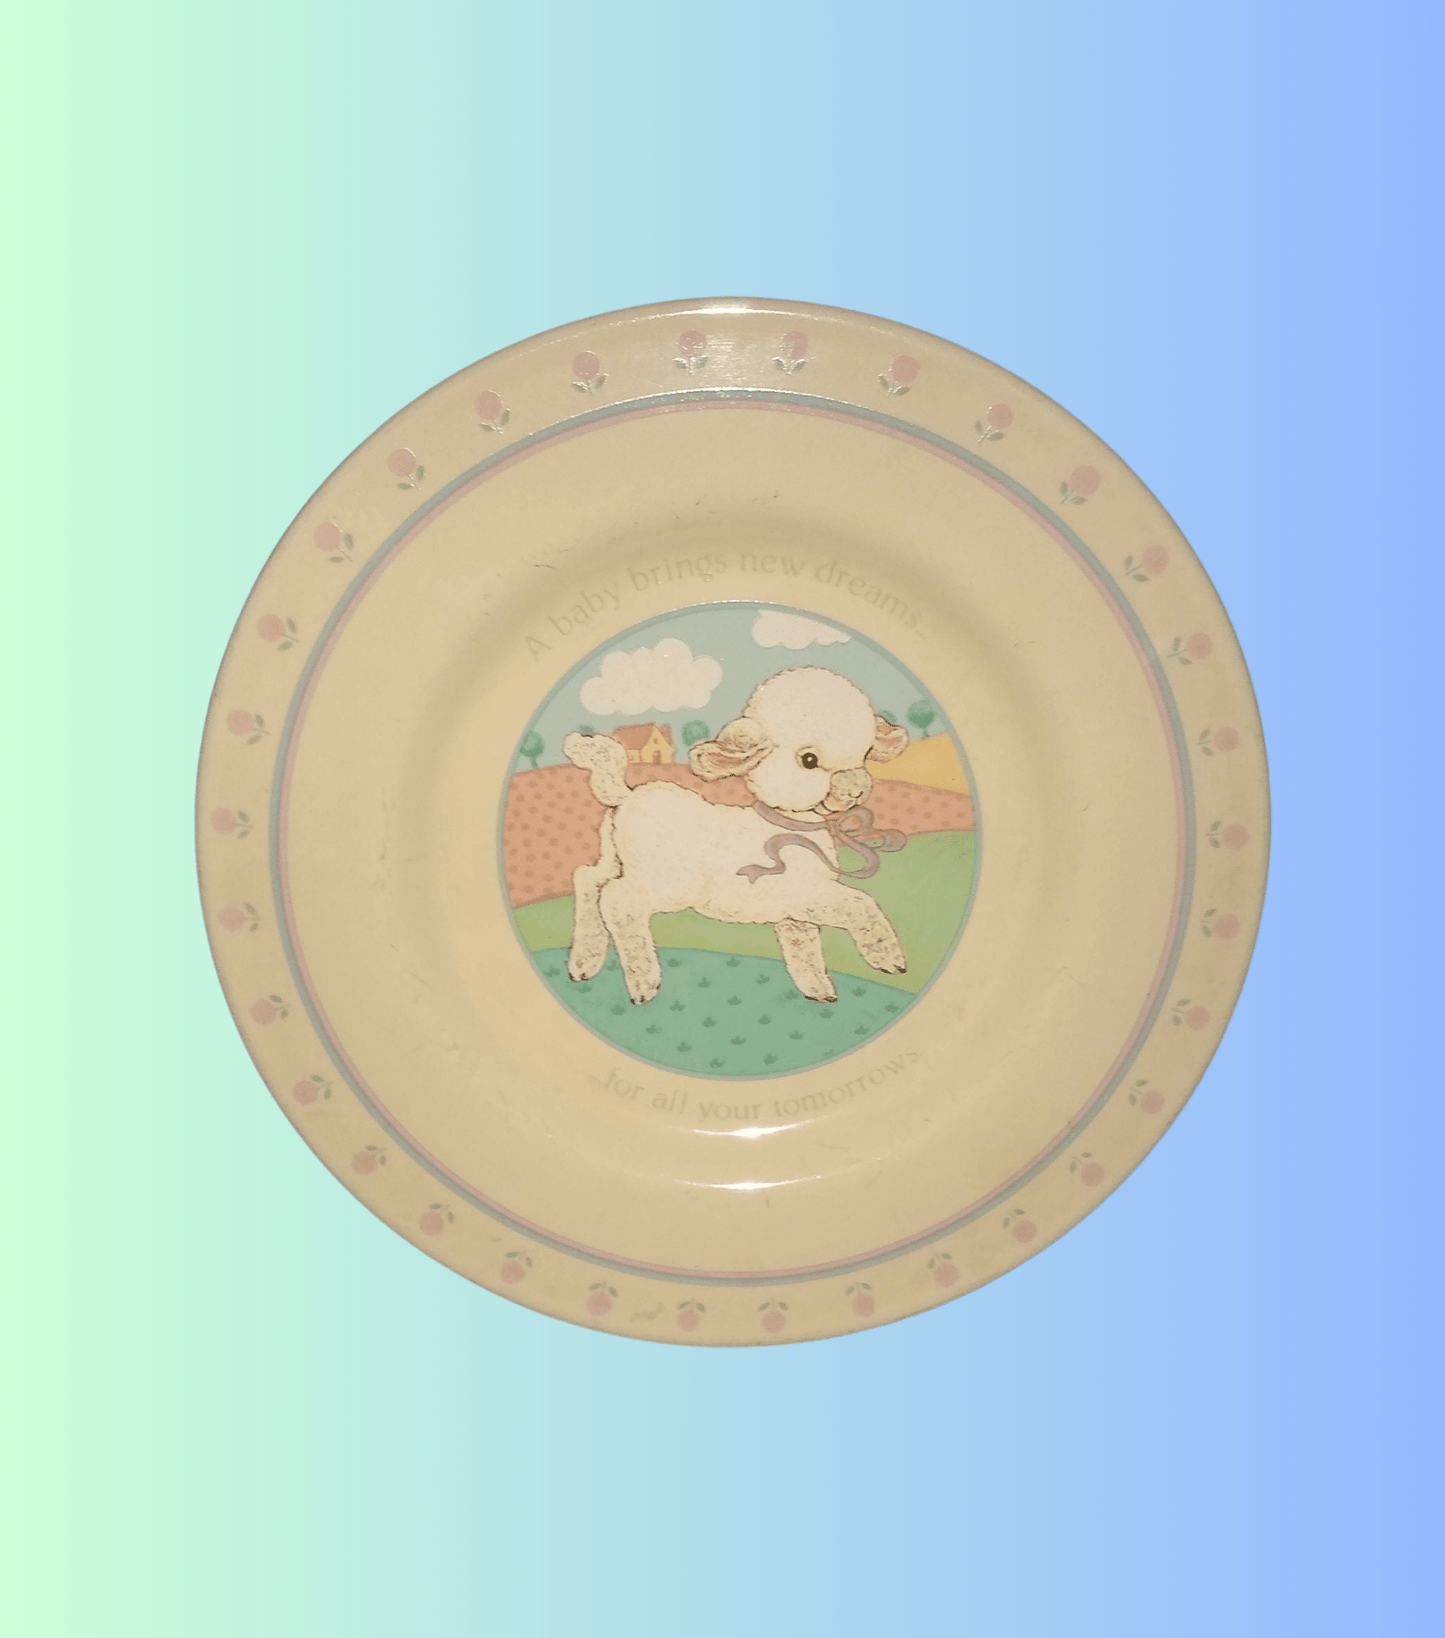 Vintage Hallmark Newborn Baby Plate With Sheep, Brings New Dreams. Made in Japan In 1984. 